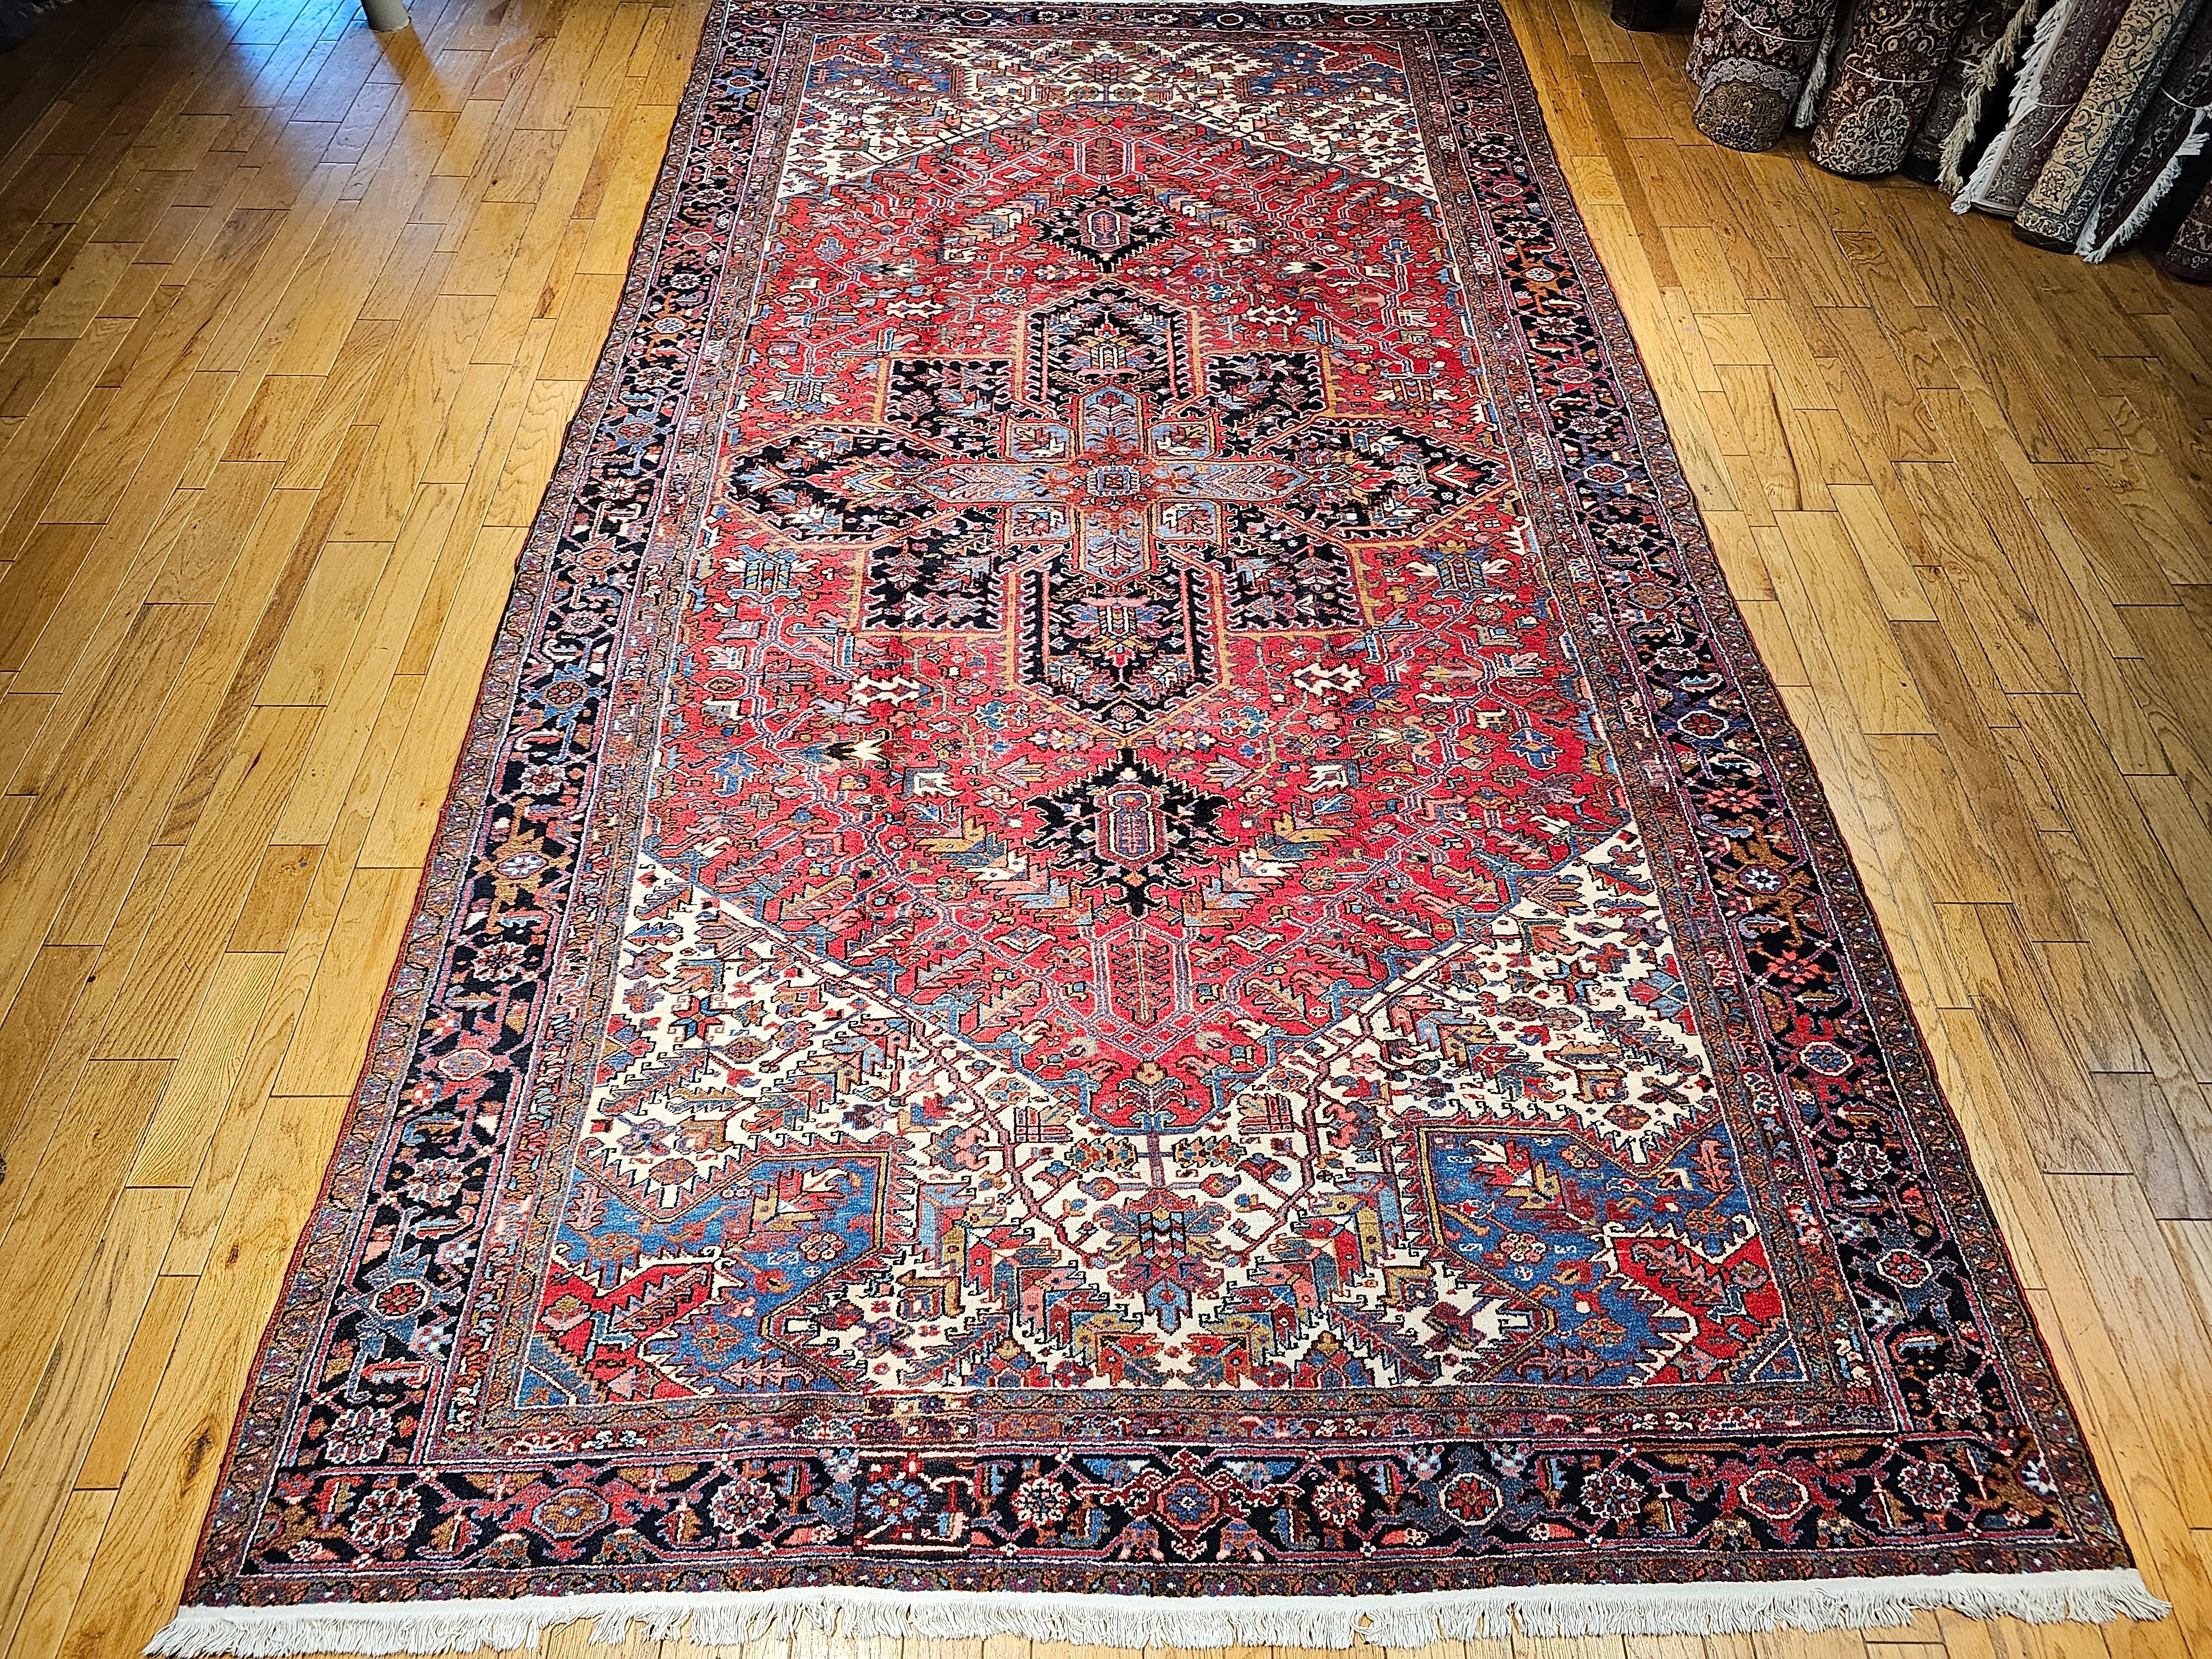 Beautiful oversize rug from Heriz in the Azerbaijan region of Northwest Persia. The Heriz rugs have ageless beauty and because of the use of natural dyes, they develop more beautiful color hues over many generations of use. The use of bright colors